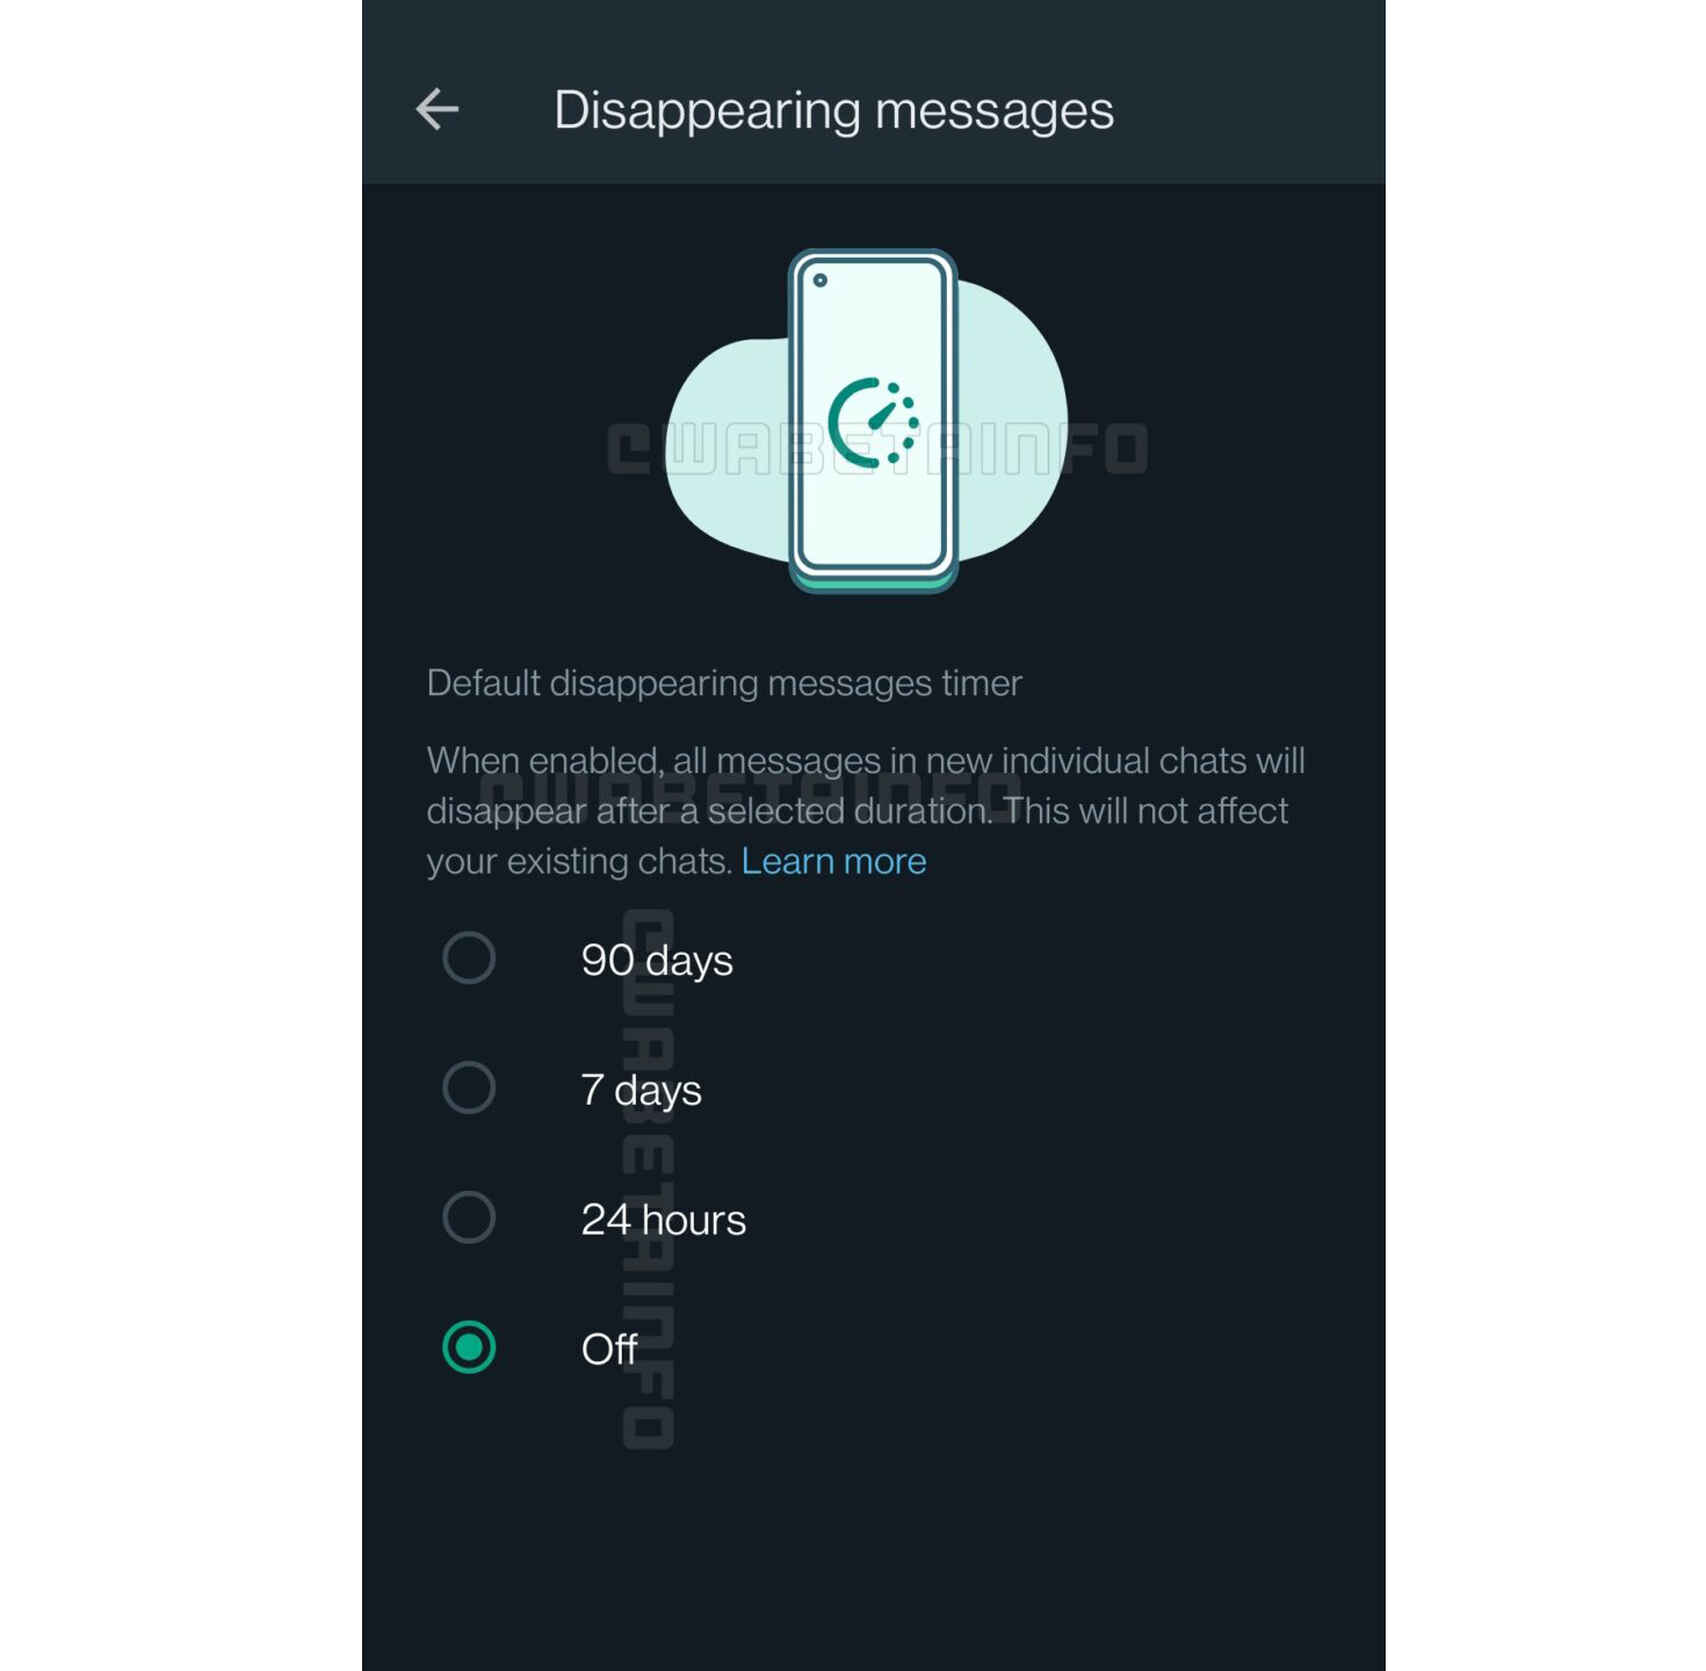 WhatsApp offers four timer options for disappearing messages